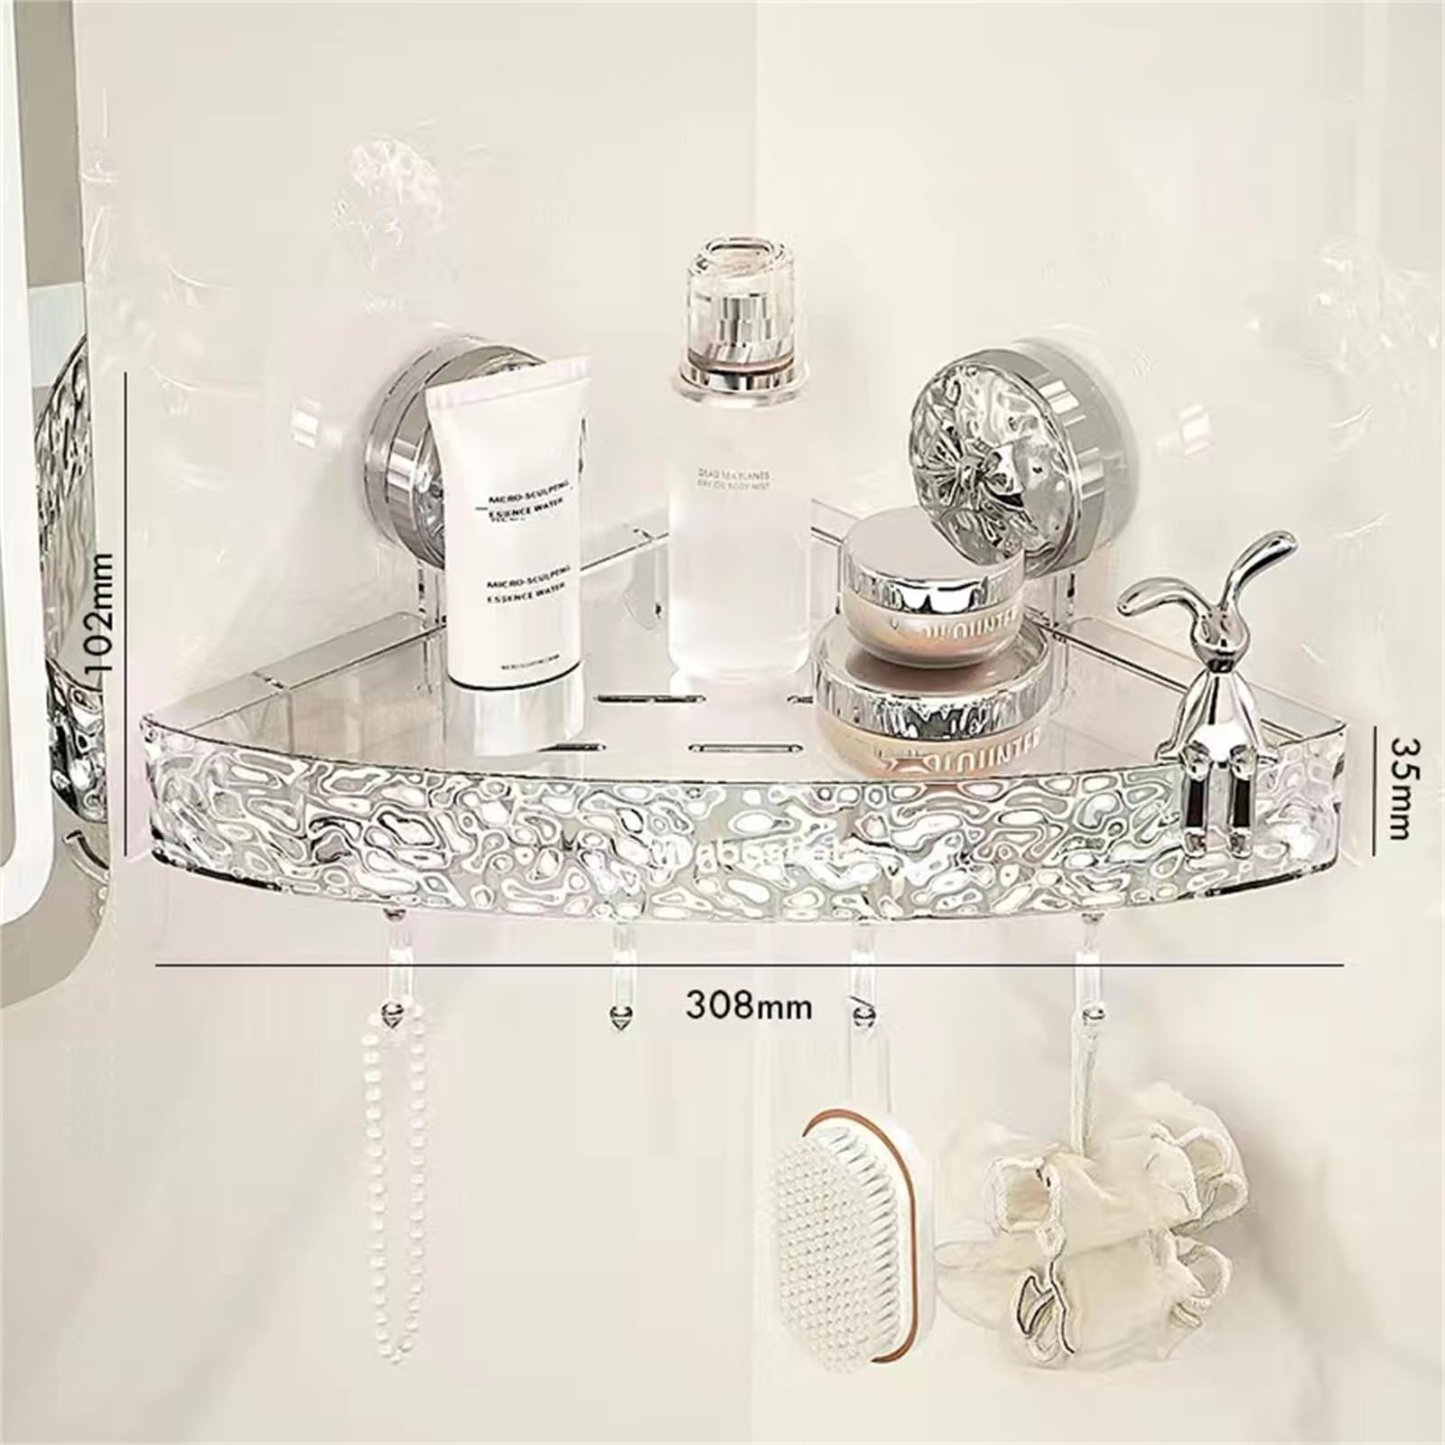 Last Day Promotion 49% OFF - Light Luxury Suction Cup Storage Rack (Reuseble)